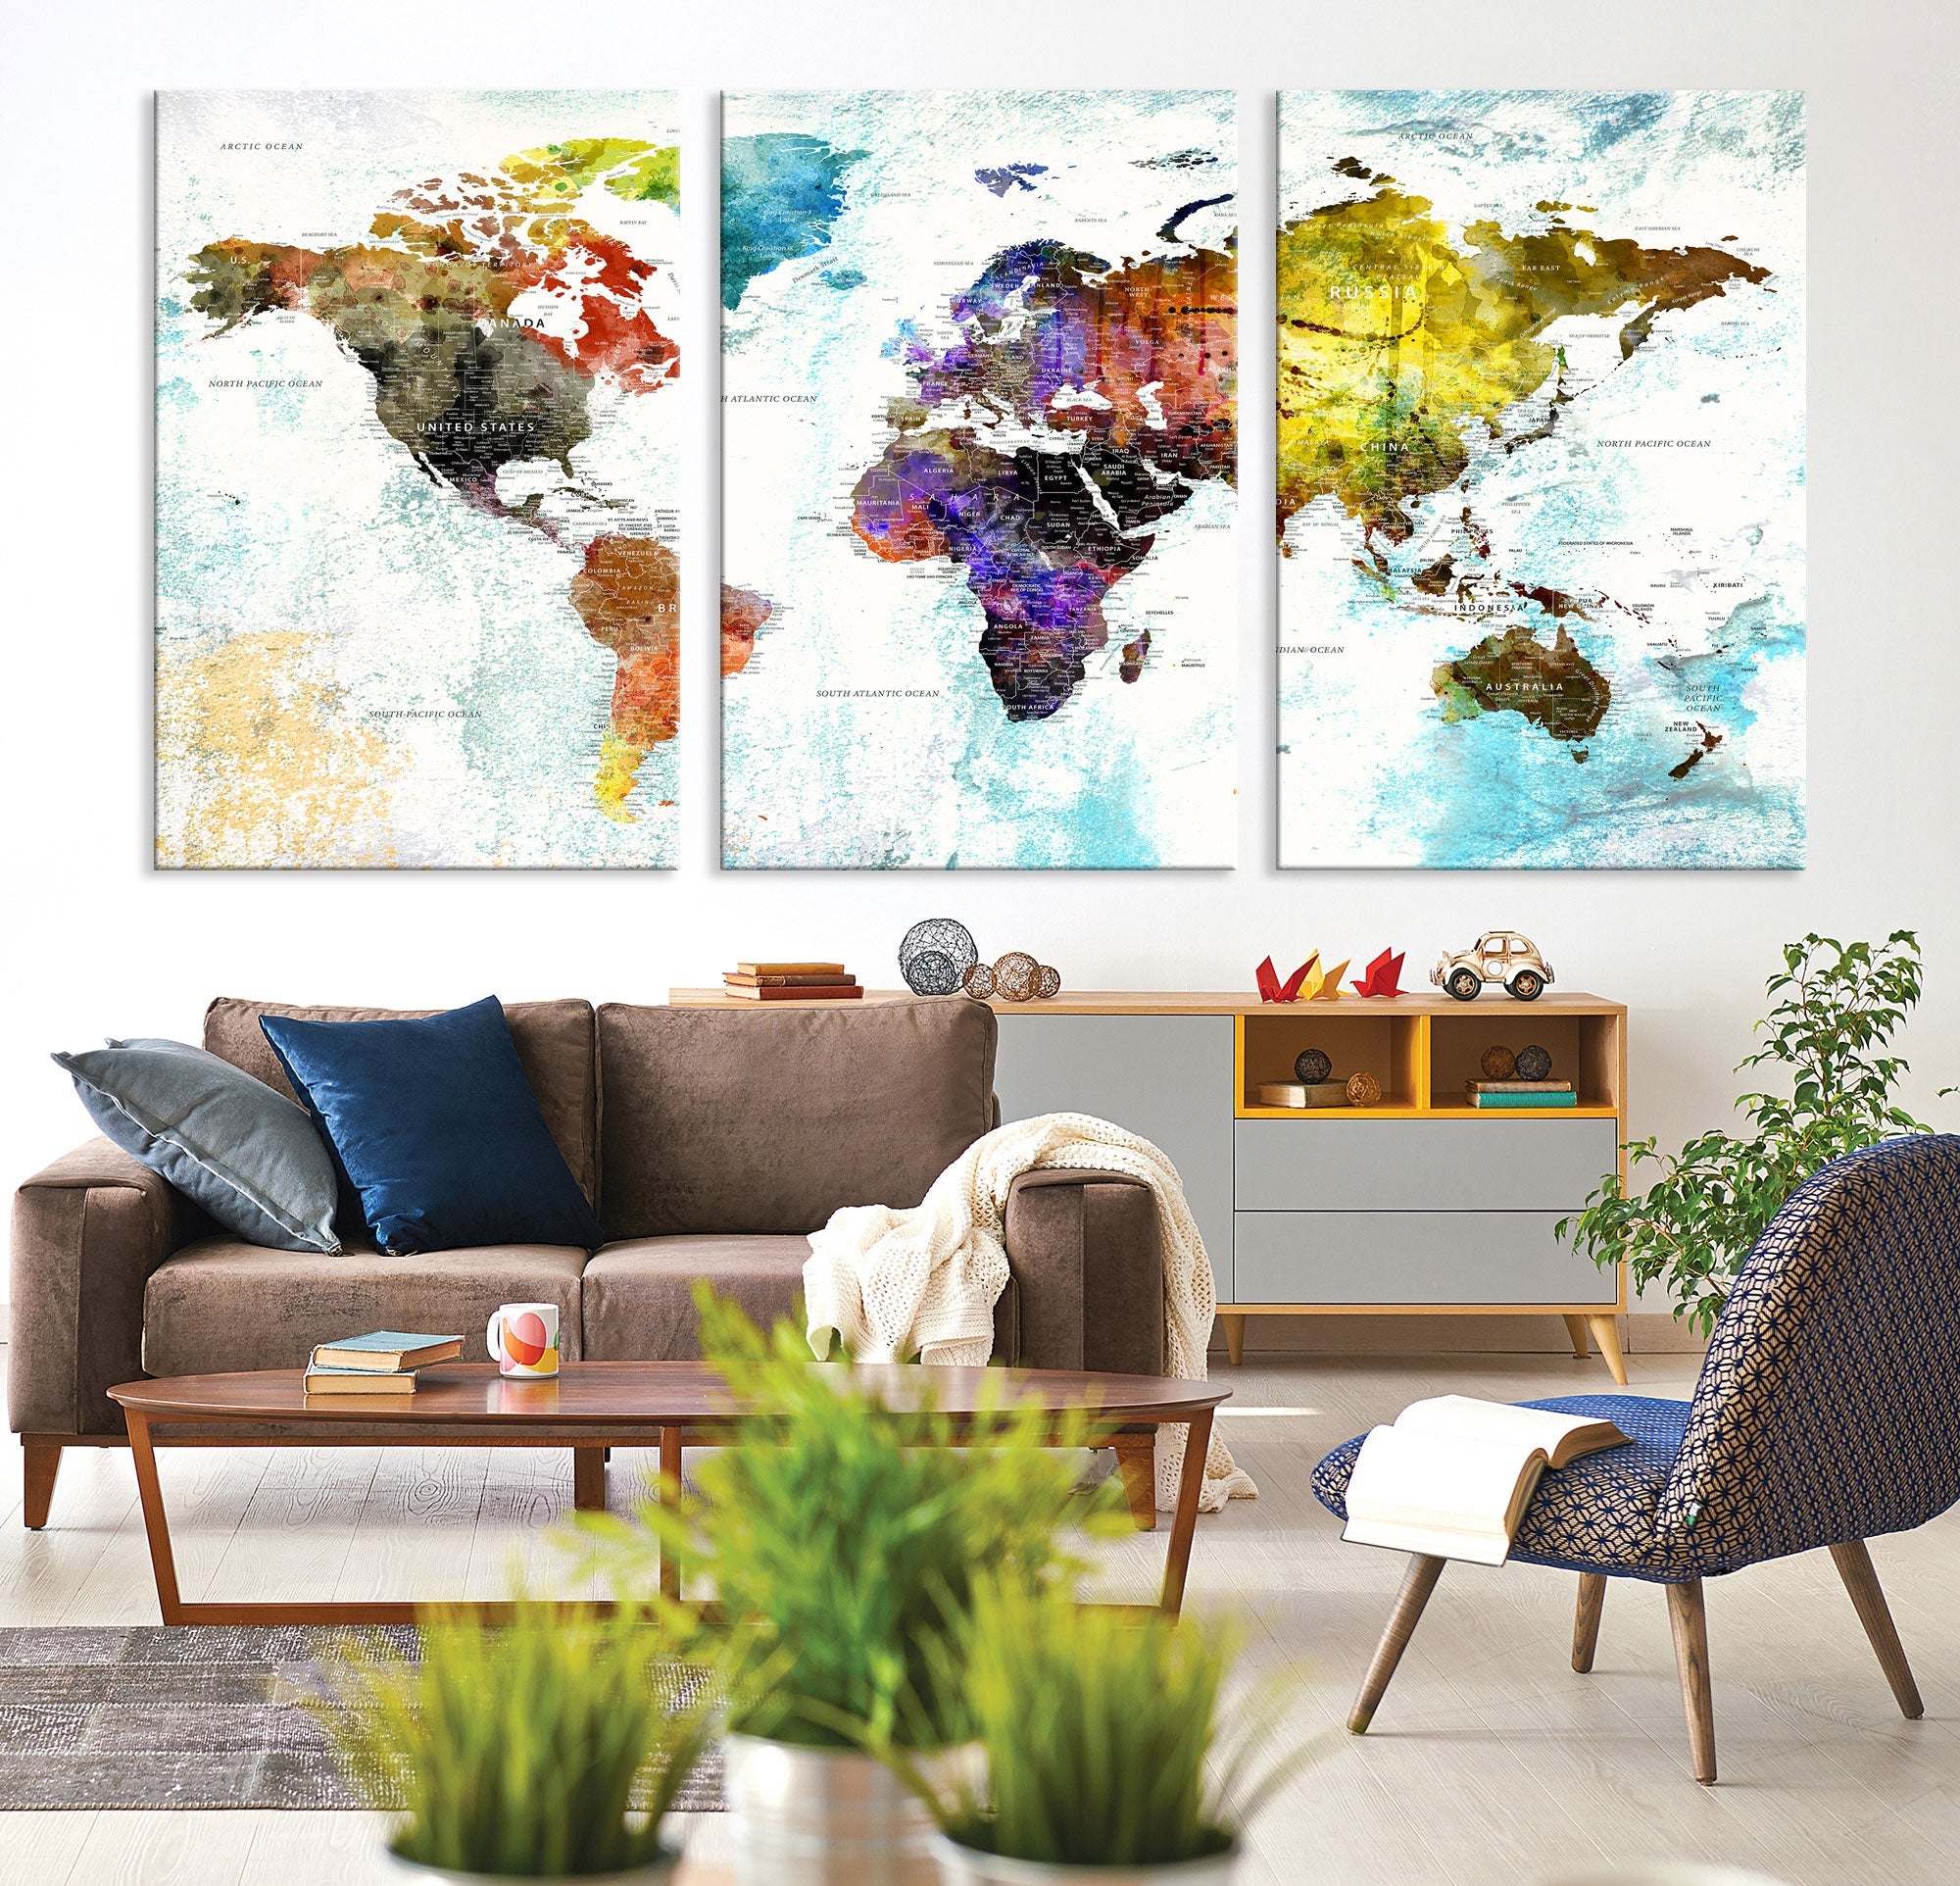 Watercolor Colorful World Map Wall Art Canvas Print Large Giclee Printing Home Decor